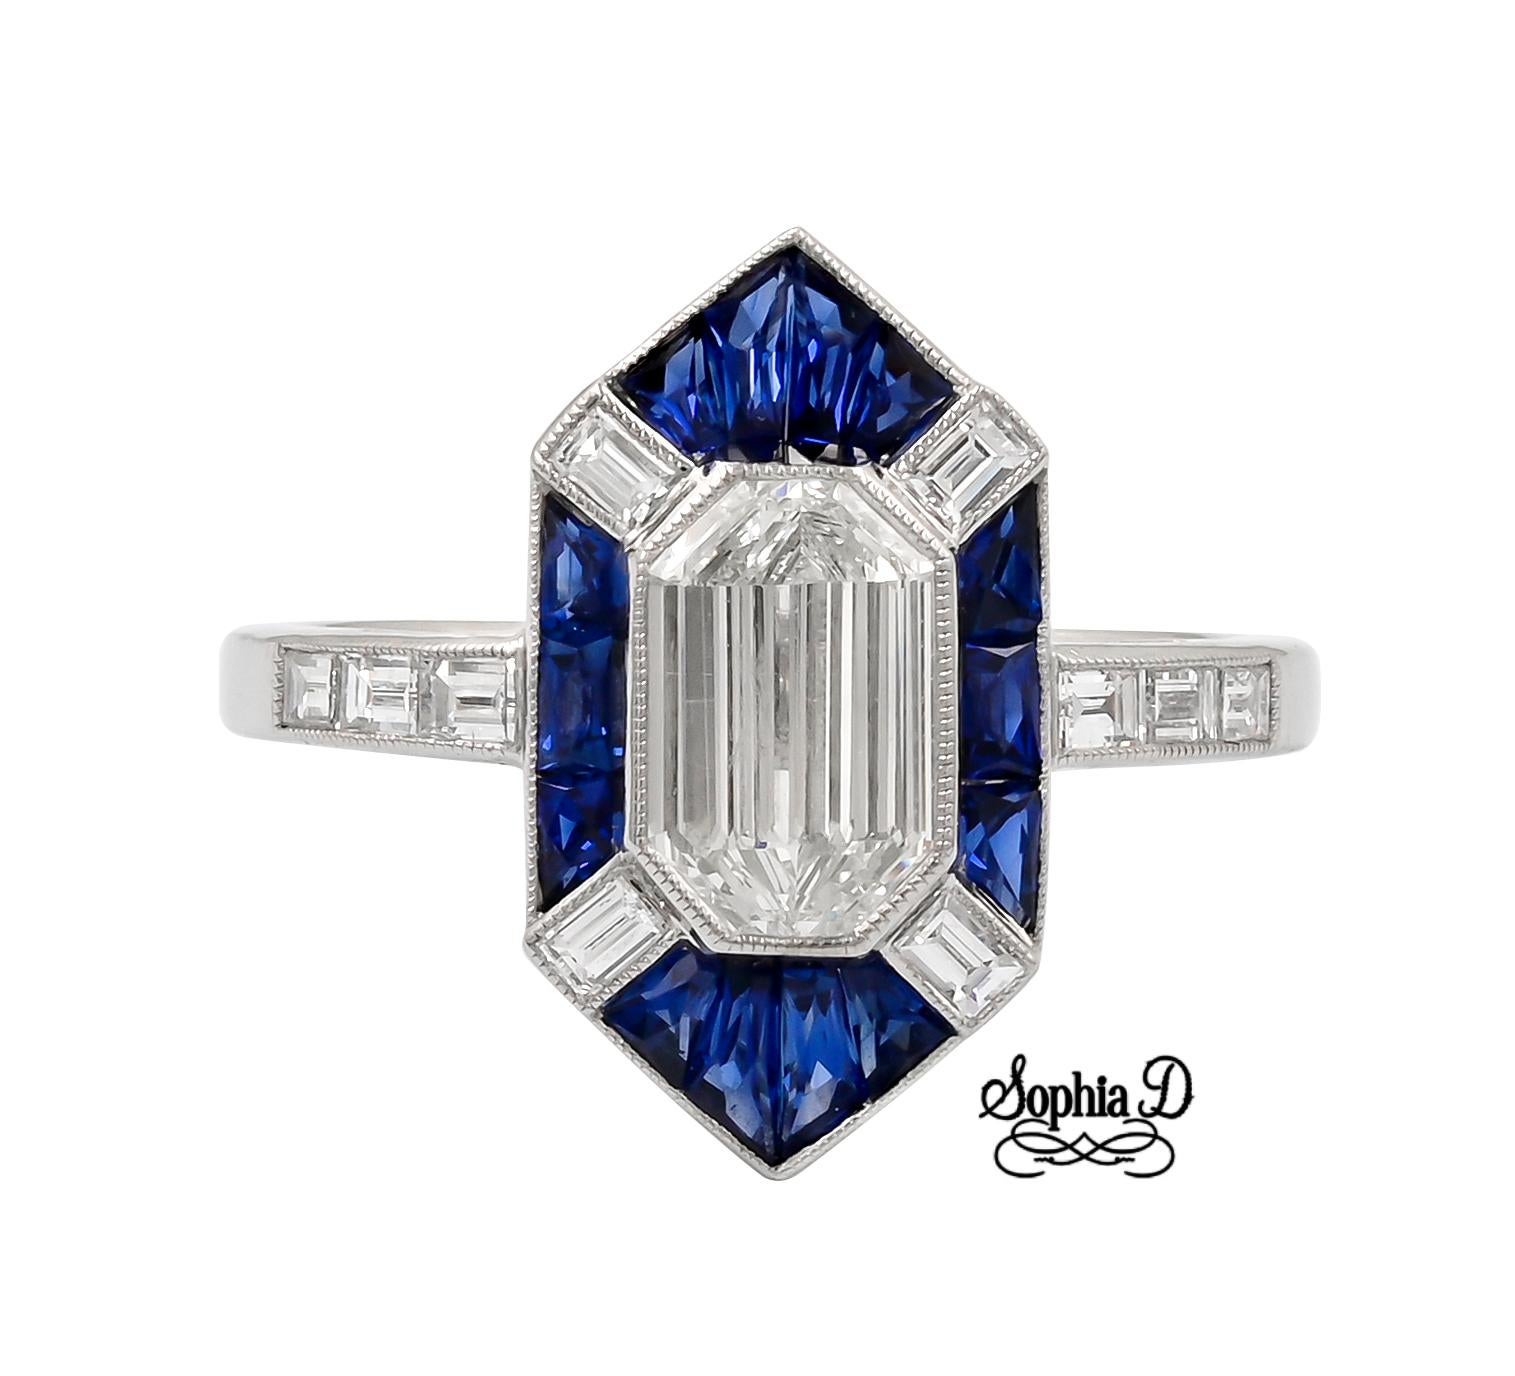 Mixed Cut Sophia D. 1.00 Carat Diamond and Blue Sapphire Art Deco Ring in Platinum Setting For Sale